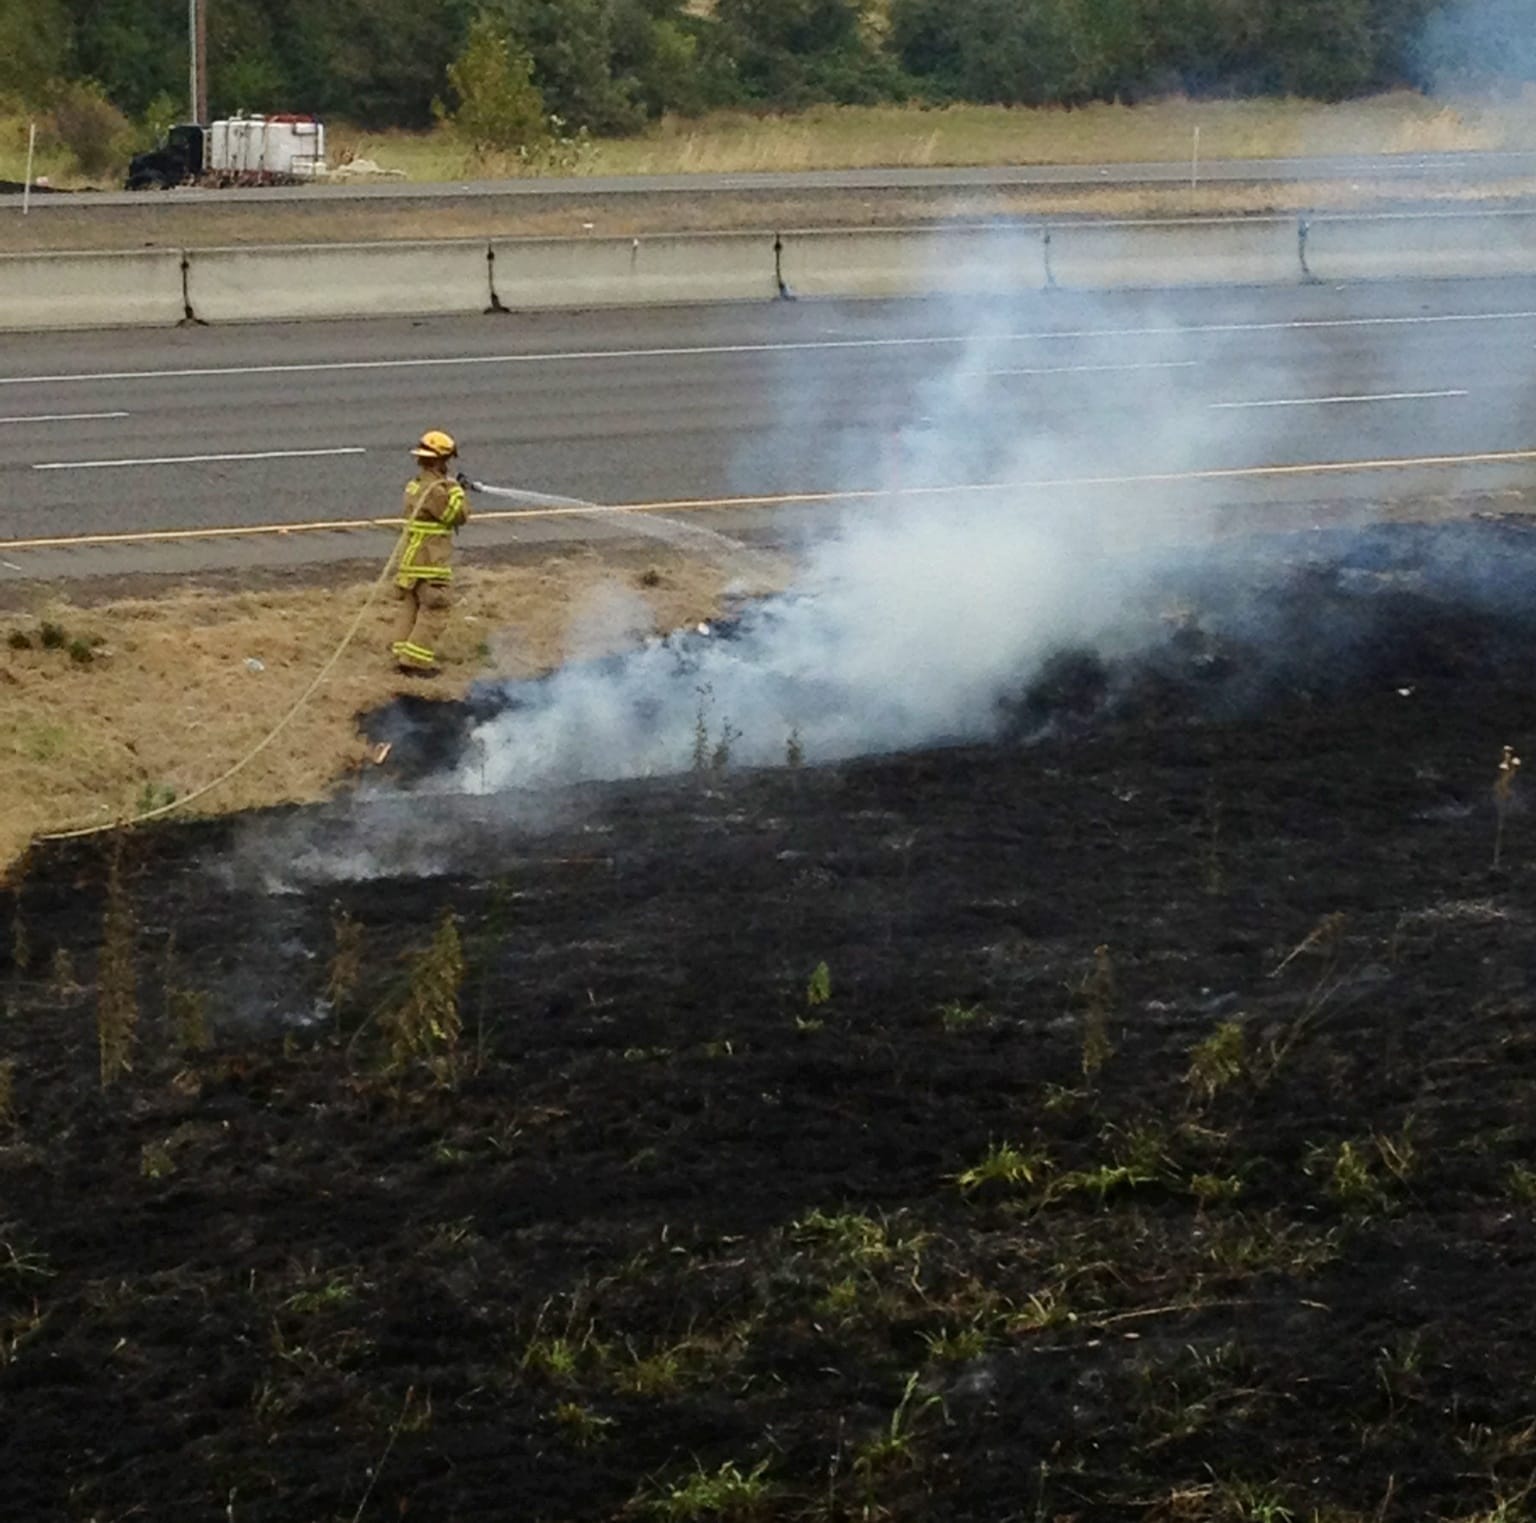 Firefighters extinguish a brush fire in the median of Interstate 5 south of Ridgefield.